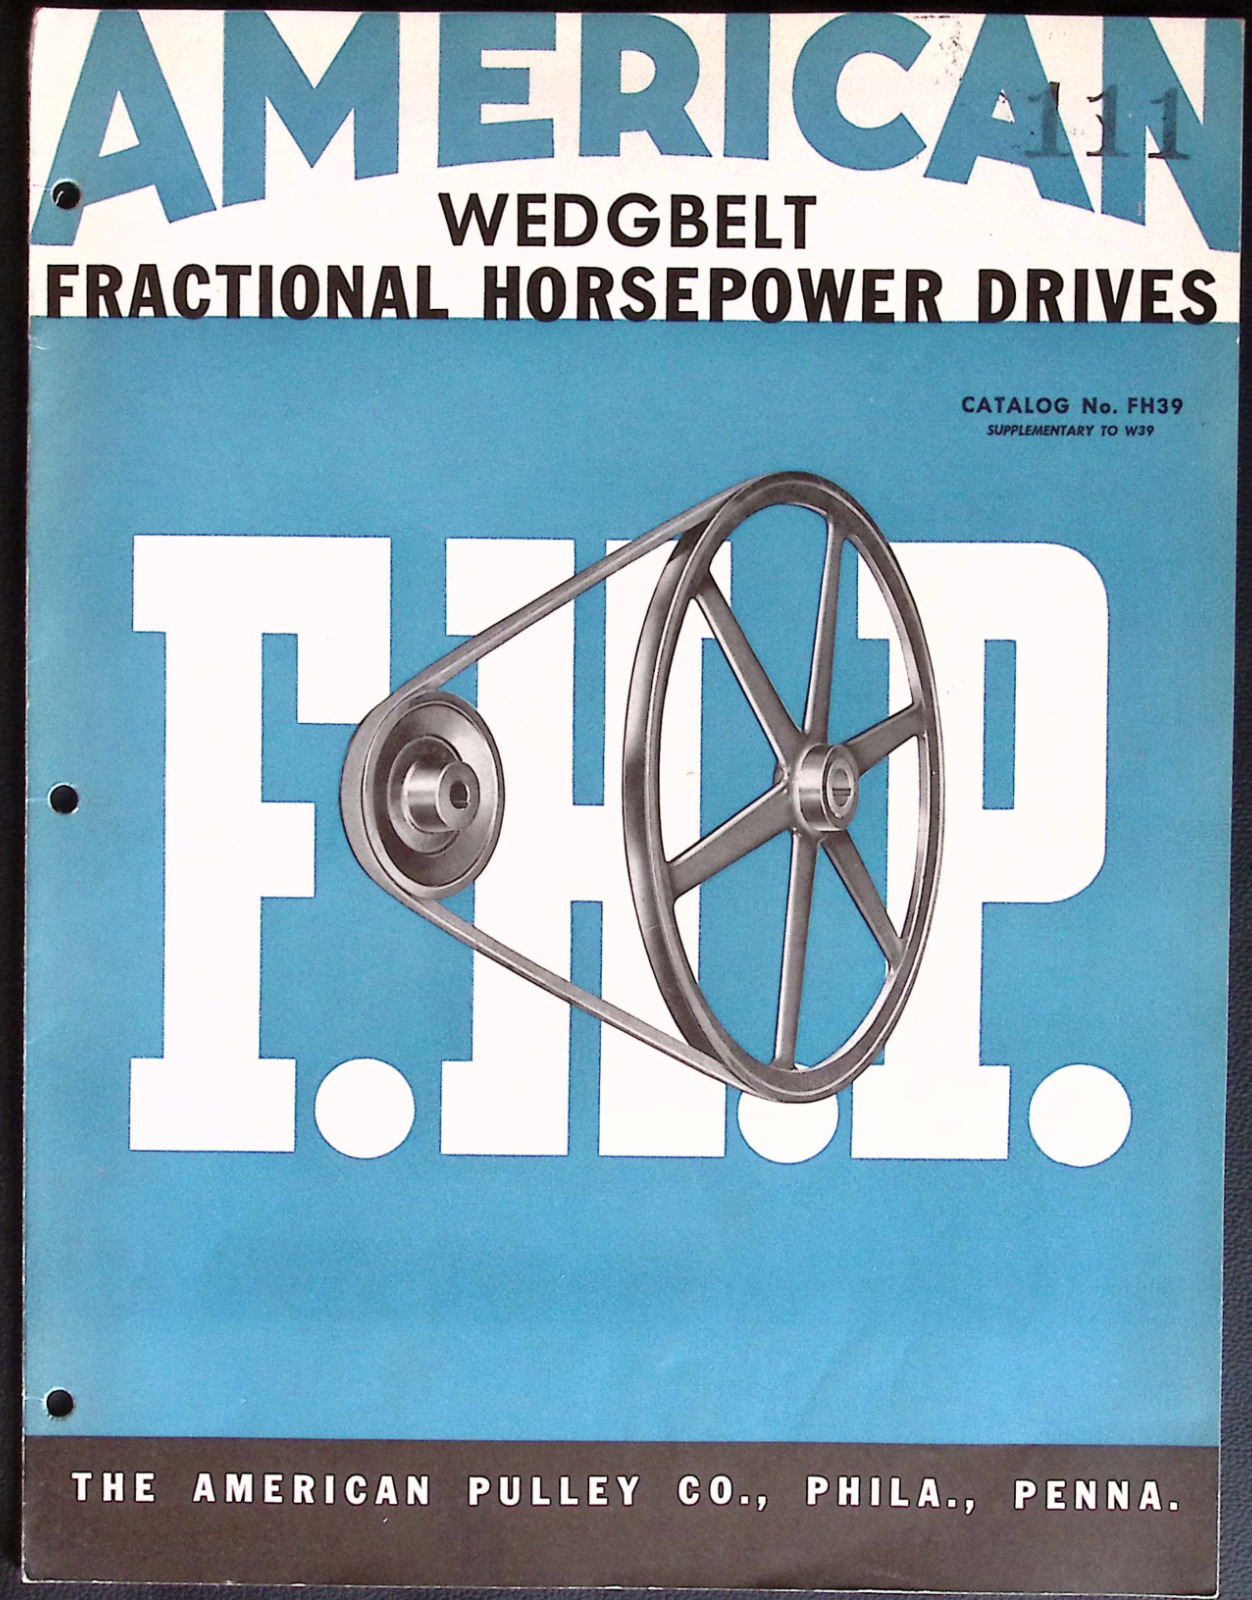 American Pulley Co American Wedgbelt Fractional Horsepower Drives ILLUSTRATED